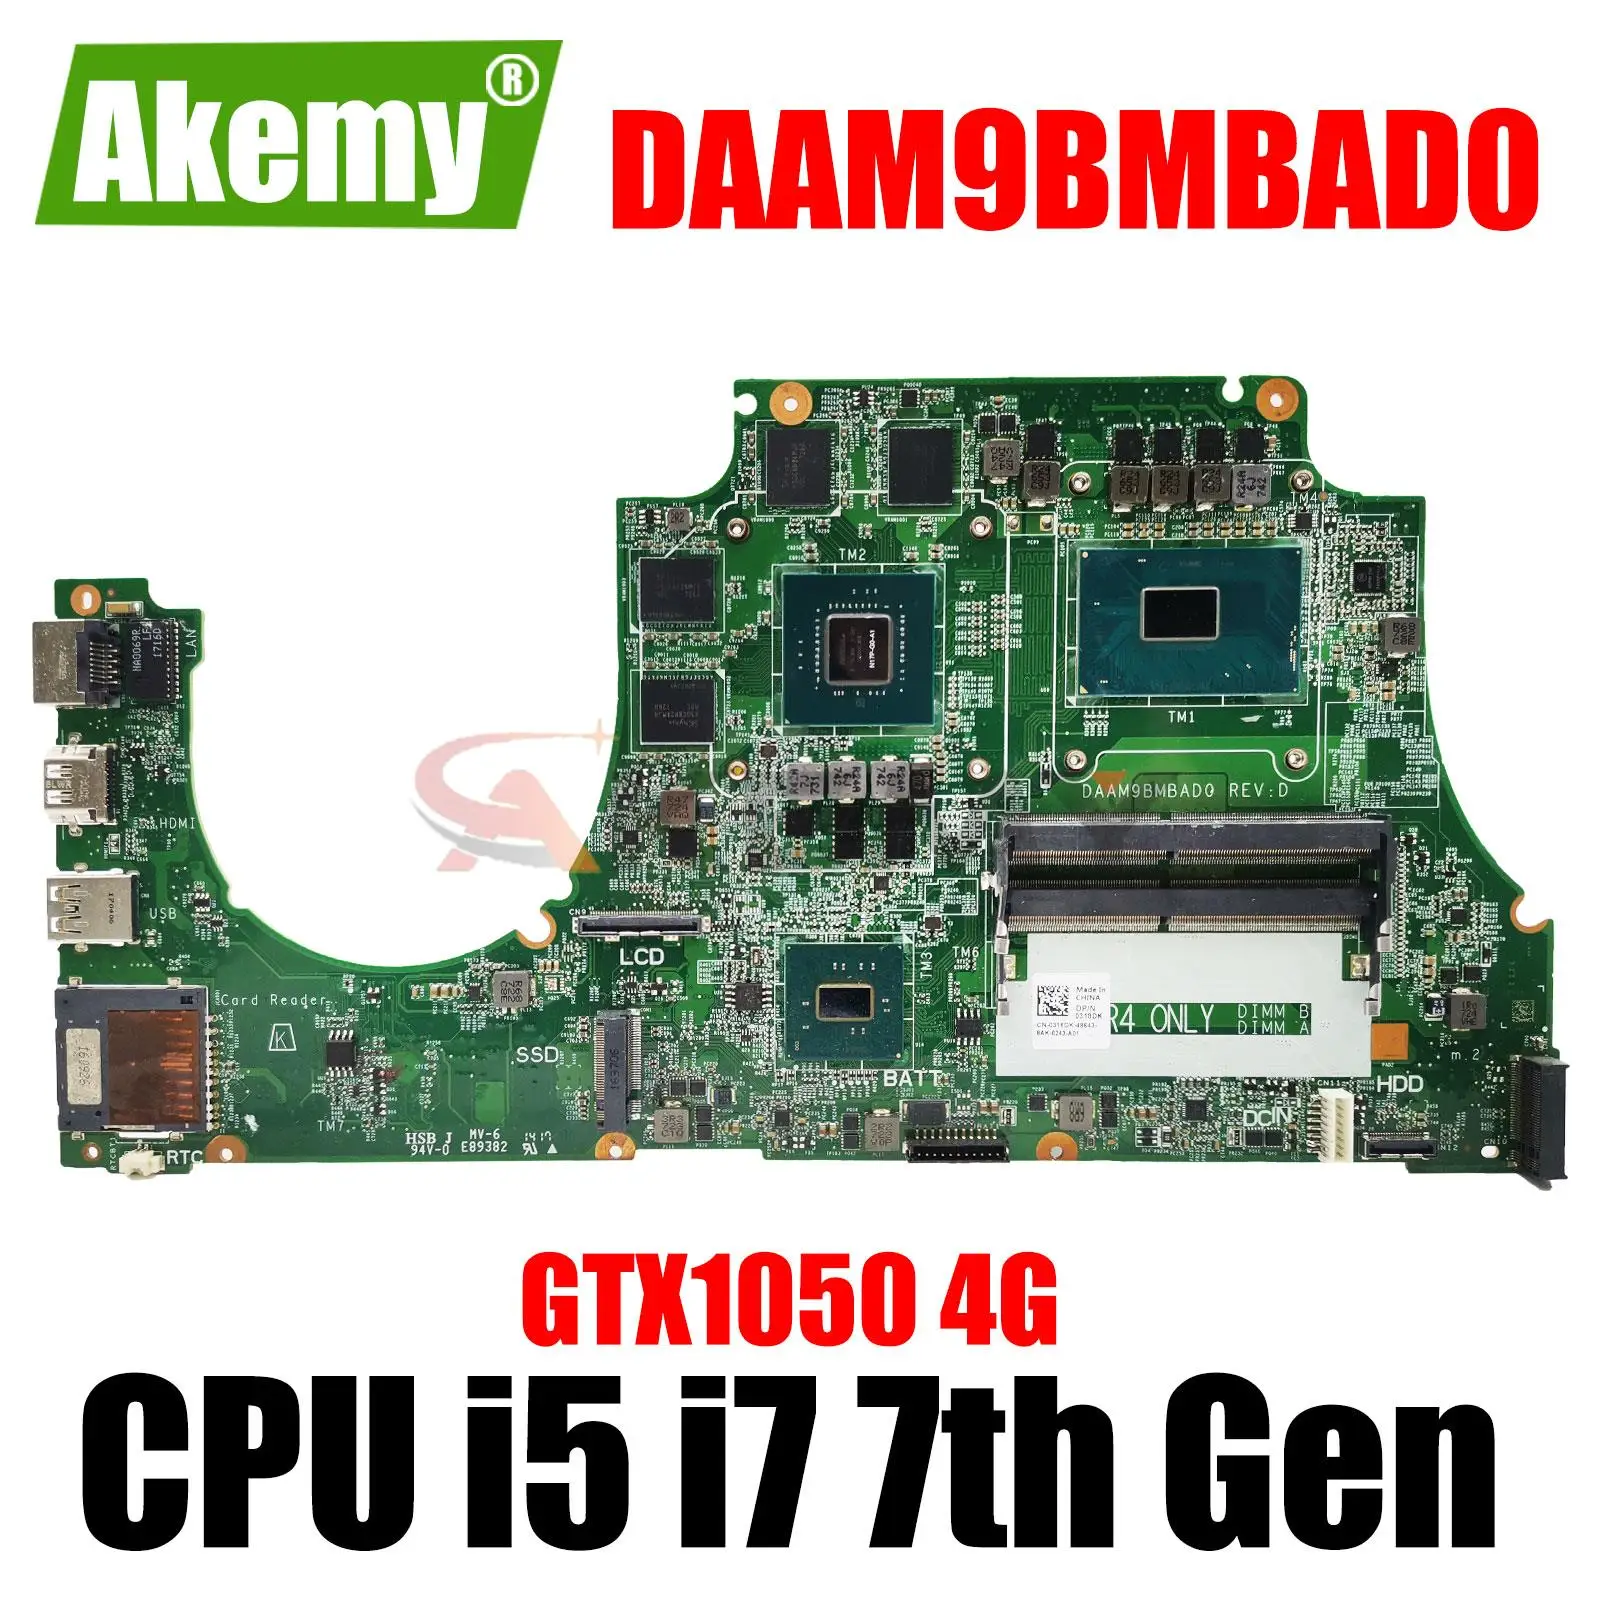 

MODEL:AM9B HKGP2 For DELL Inspiron 15 5577 Notebook Mainboard 0TF0TH 0318DK DAAM9BMBAD0 DAAM9BMBAE0 Laptop Motherboard DDR4